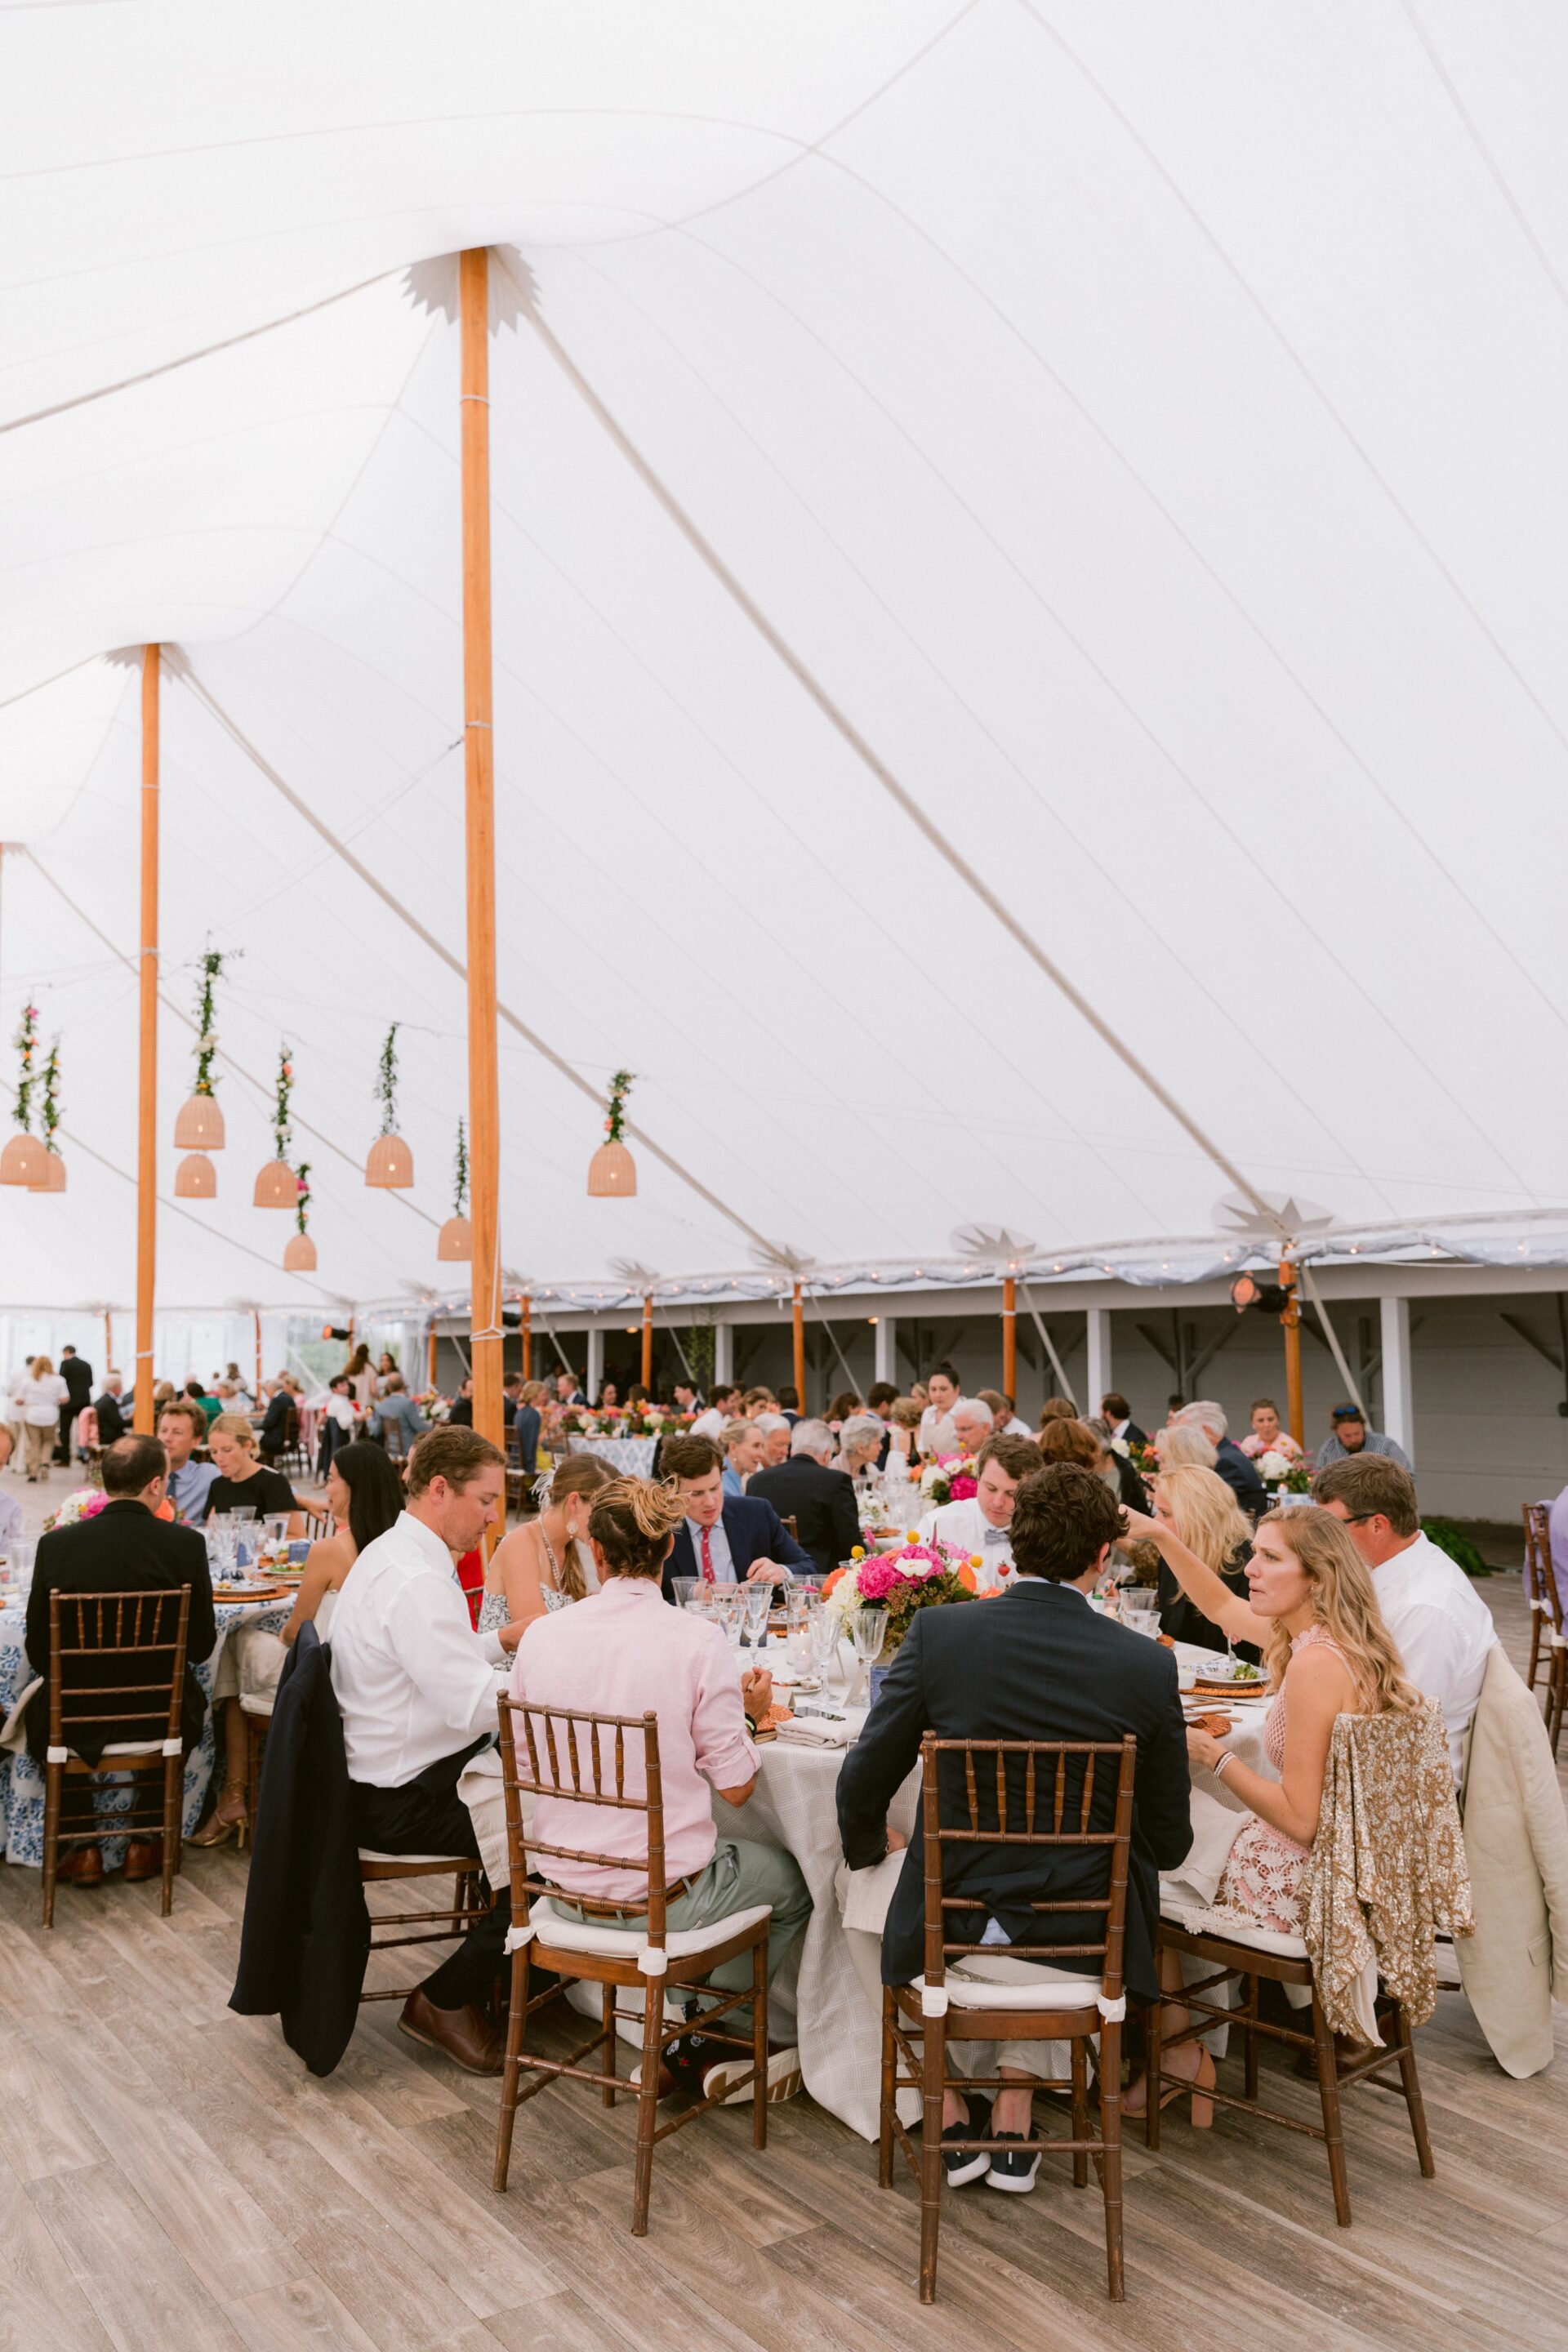 Wedding Venue with guests seated at tables